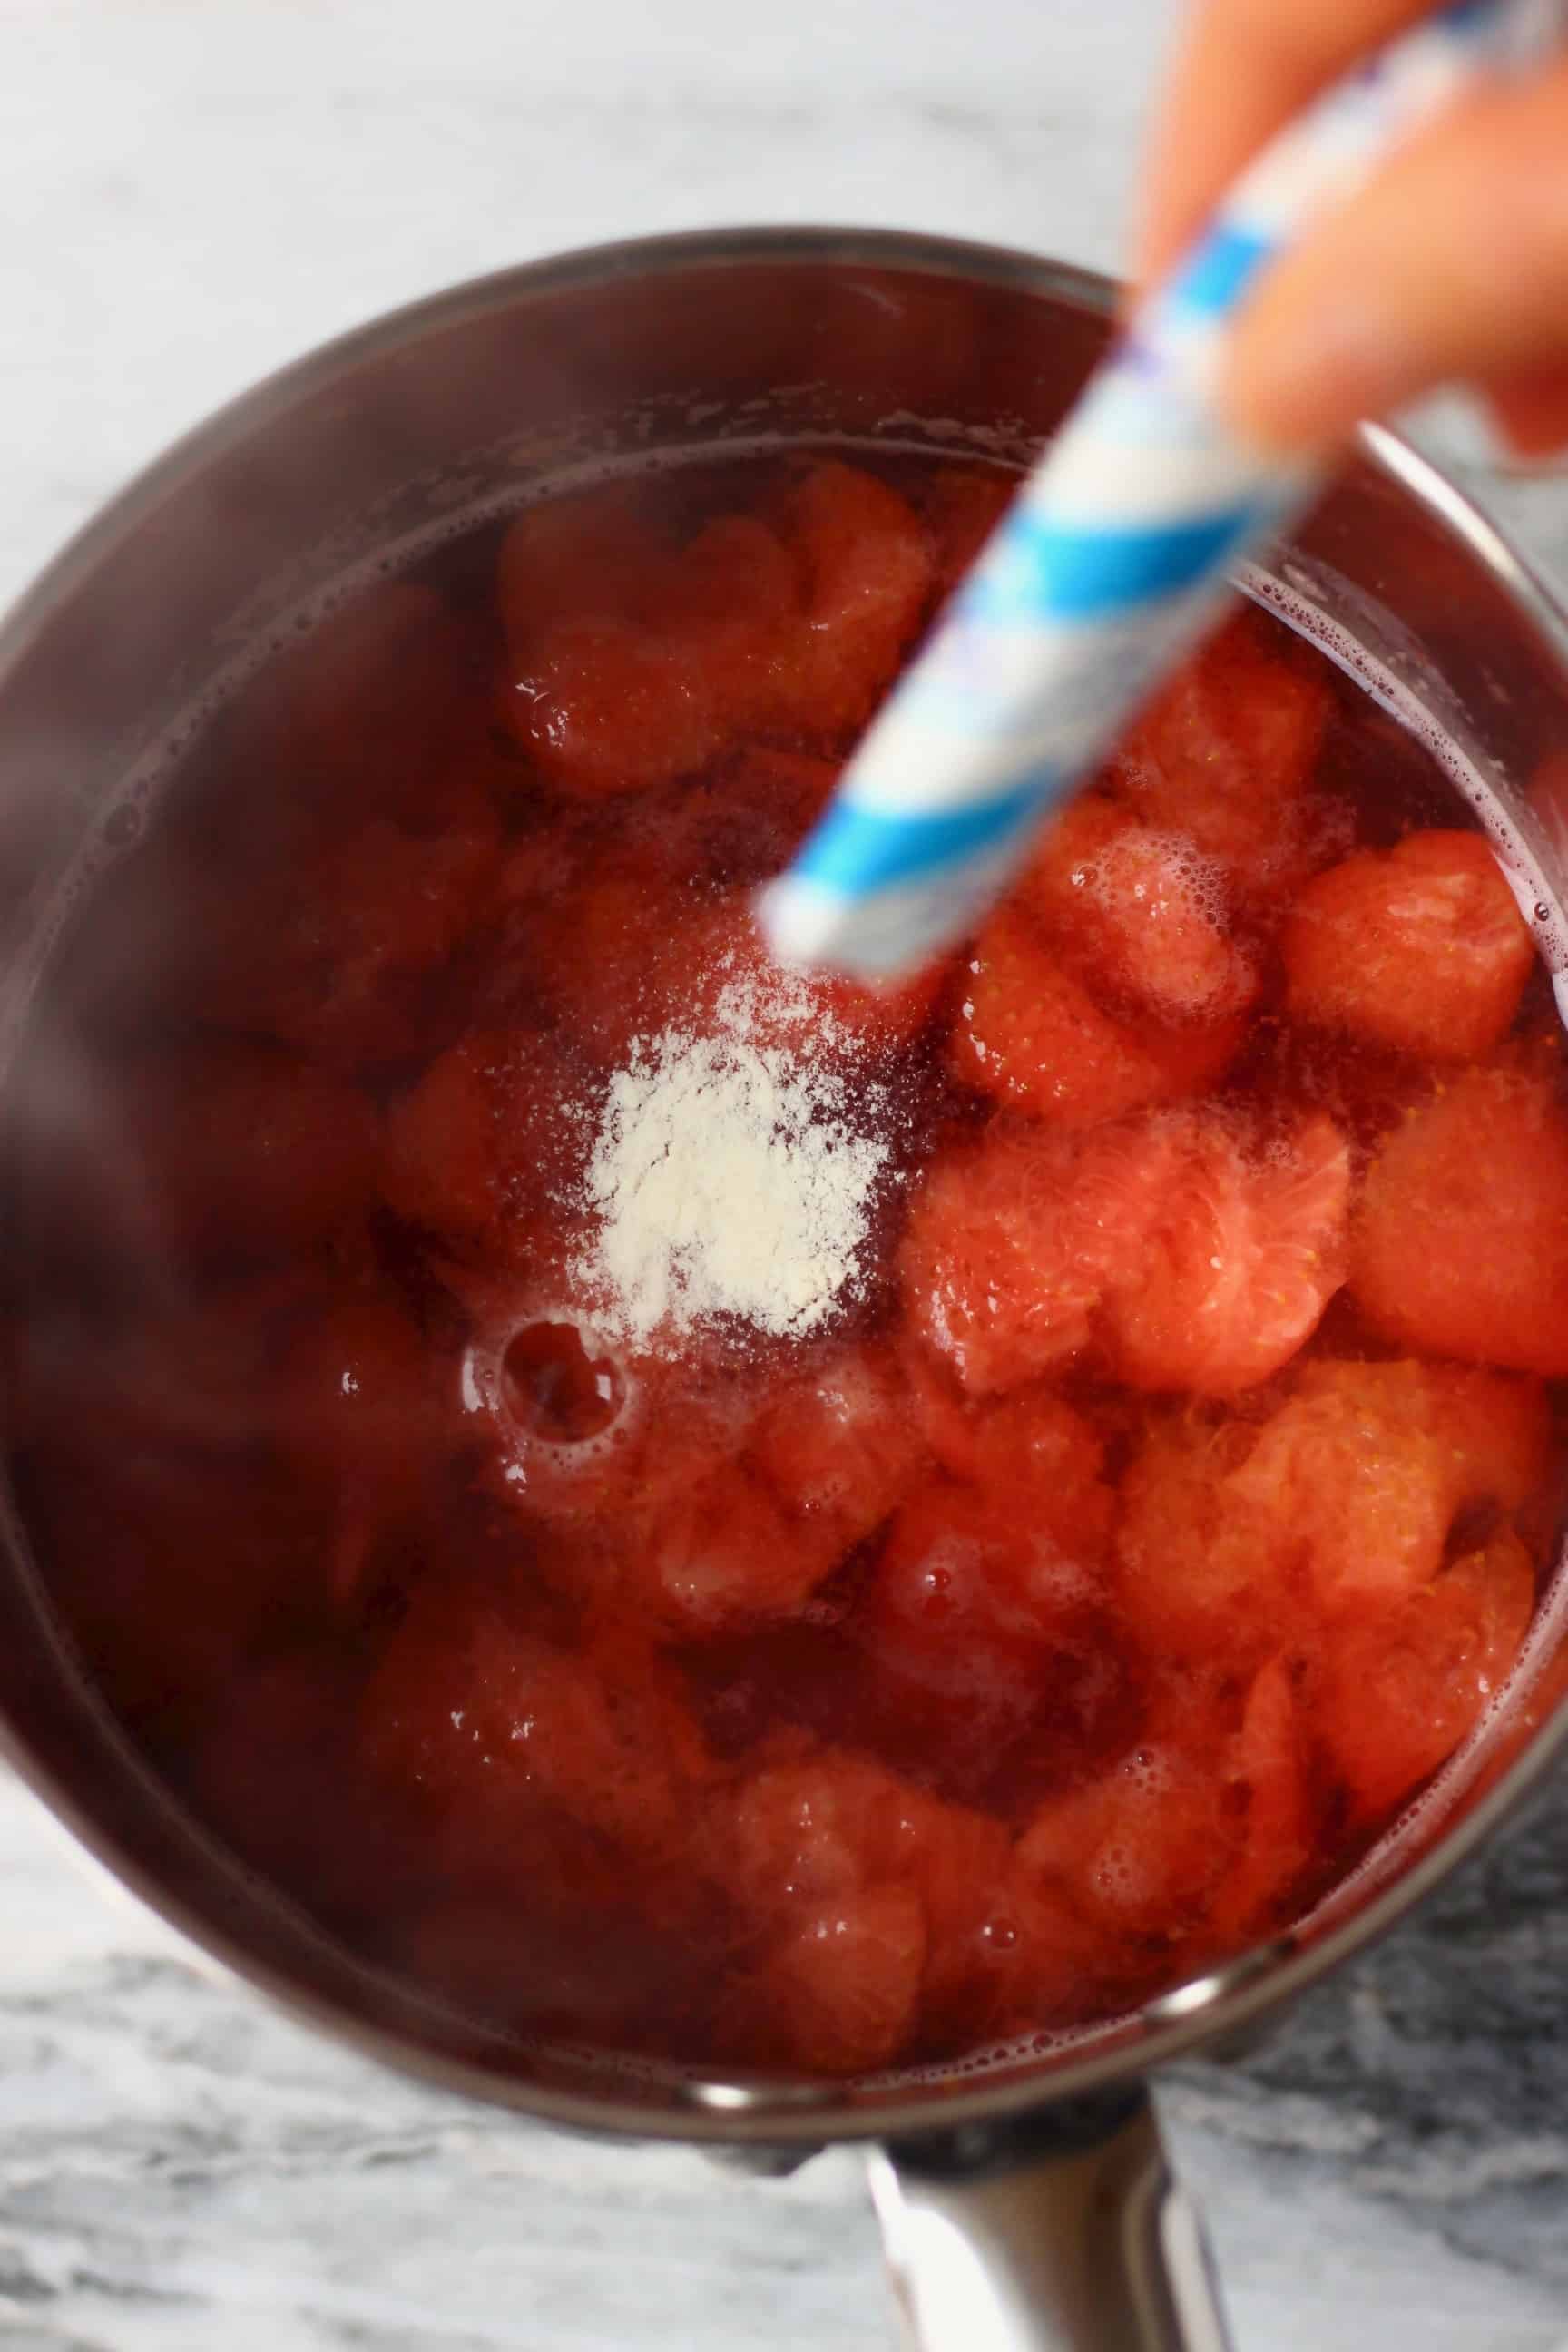 Cooked strawberries and water in a pan with agar powder being sprinkled in